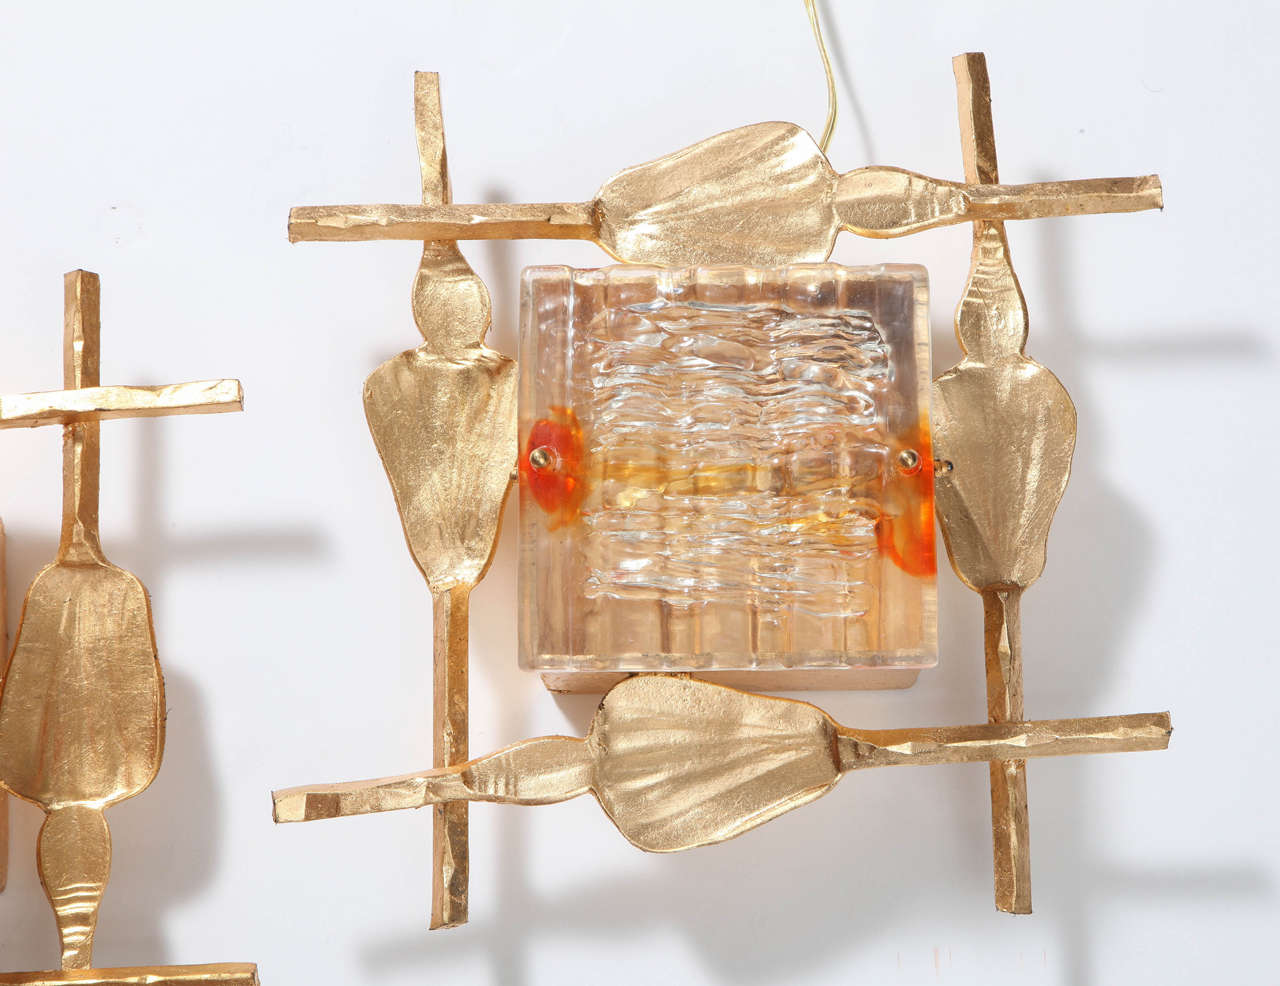 Decorative pair of sconces, Sweden, circa 1960. Gold leave metal with a lucite cover.